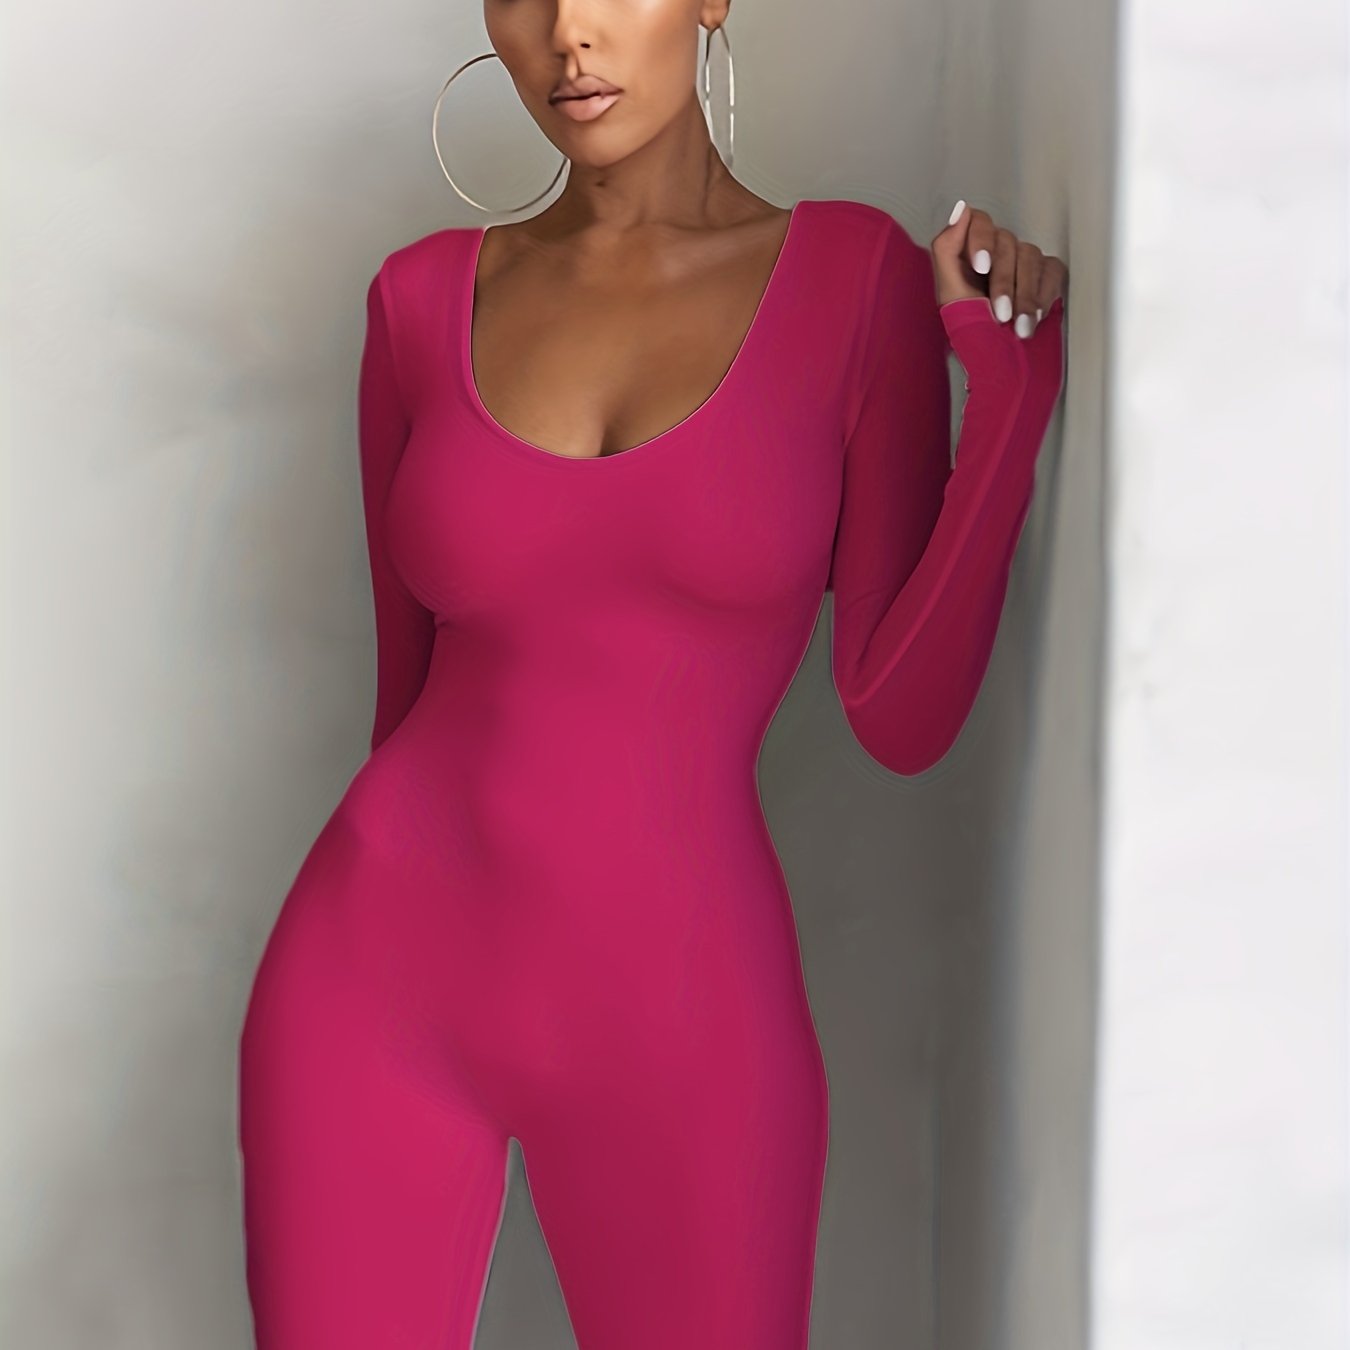 Sunisery Women Ribbed Knitted Bodycon Jumpsuits Solid Color Square Neck  Long Sleeve Exercise Sport Jumpsuit Streetwear Pink L